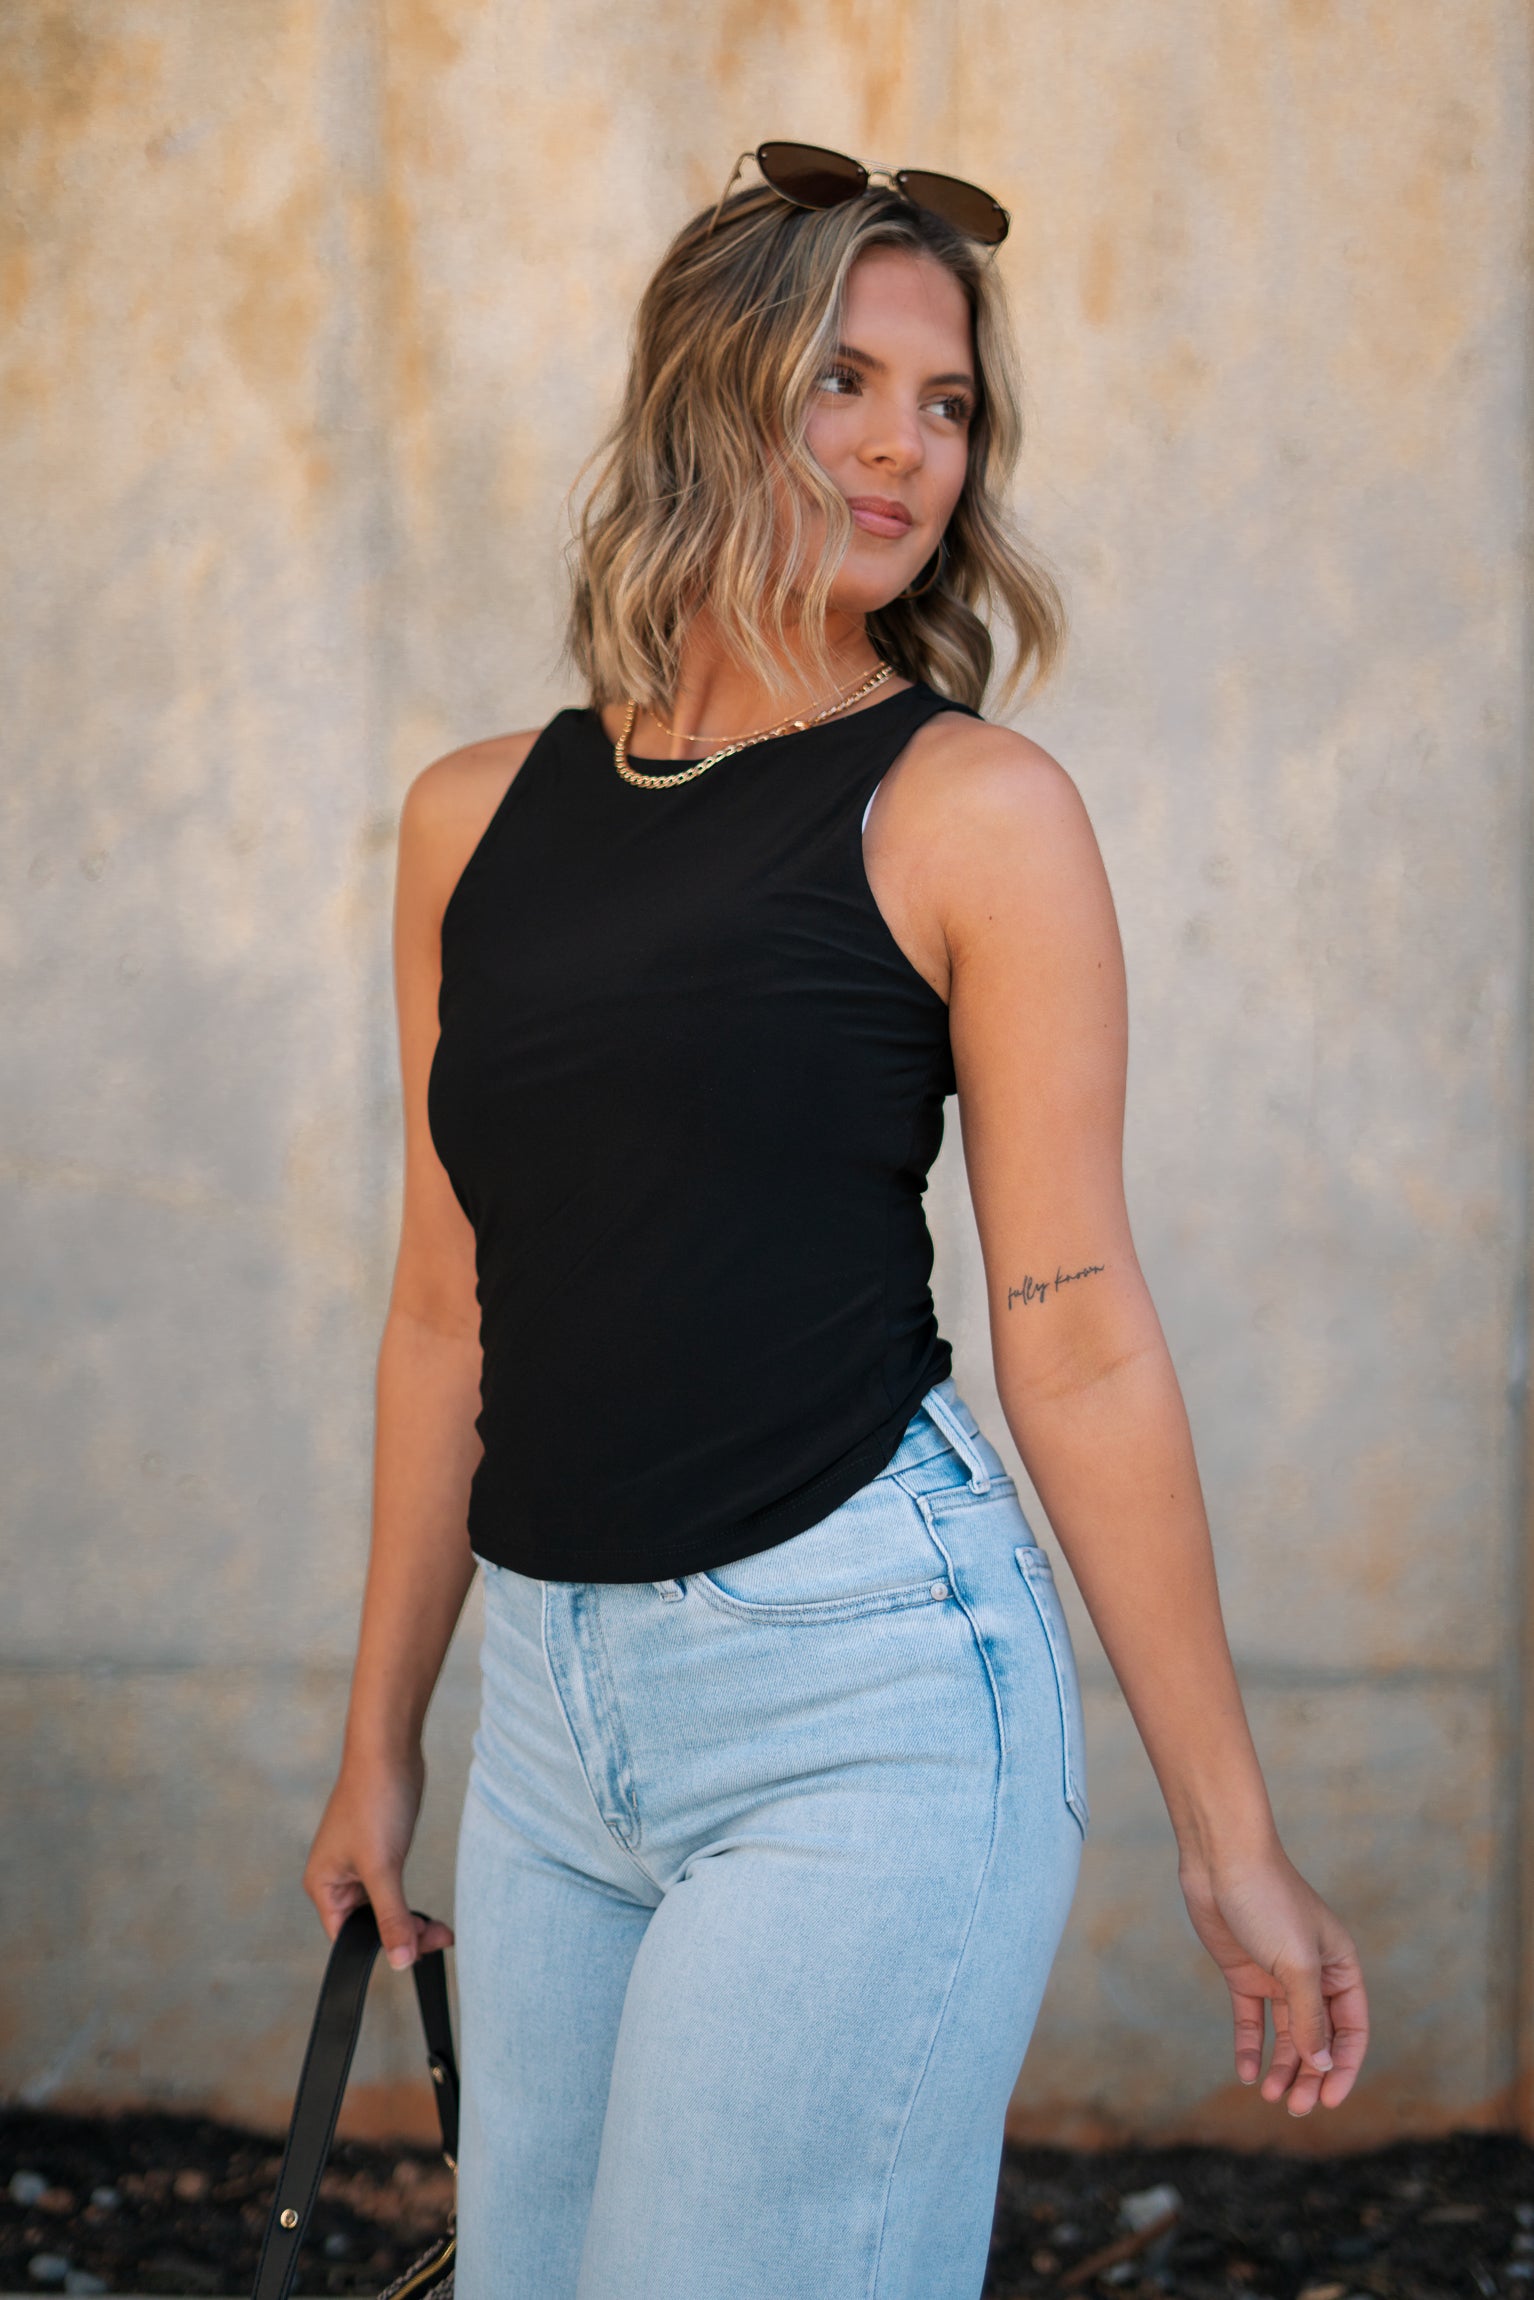 Frontal side view of female model wearing the Brielle Black Sleeveless Tank which features Black Lightweight Fabric, Round Neckline and Sleeveless